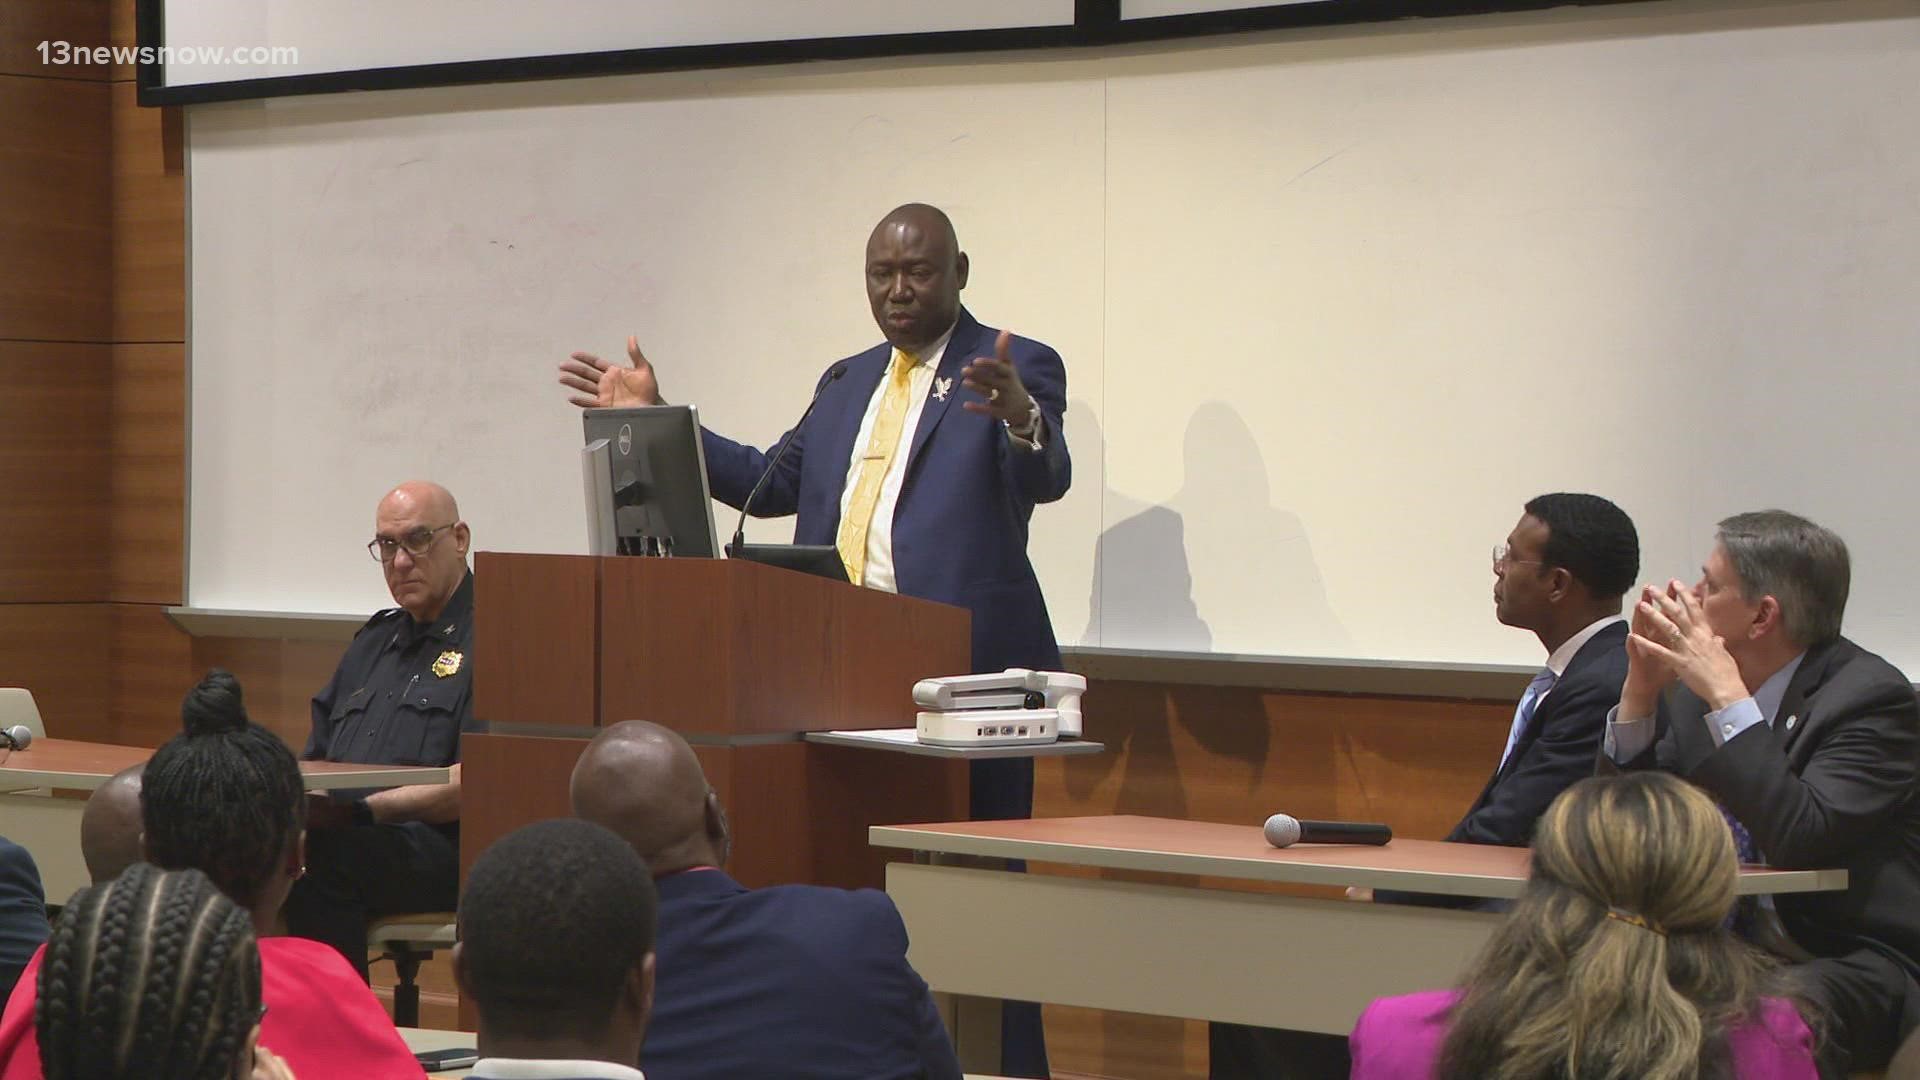 City leaders also shared ideas on how they're working to fight crime in Norfolk.